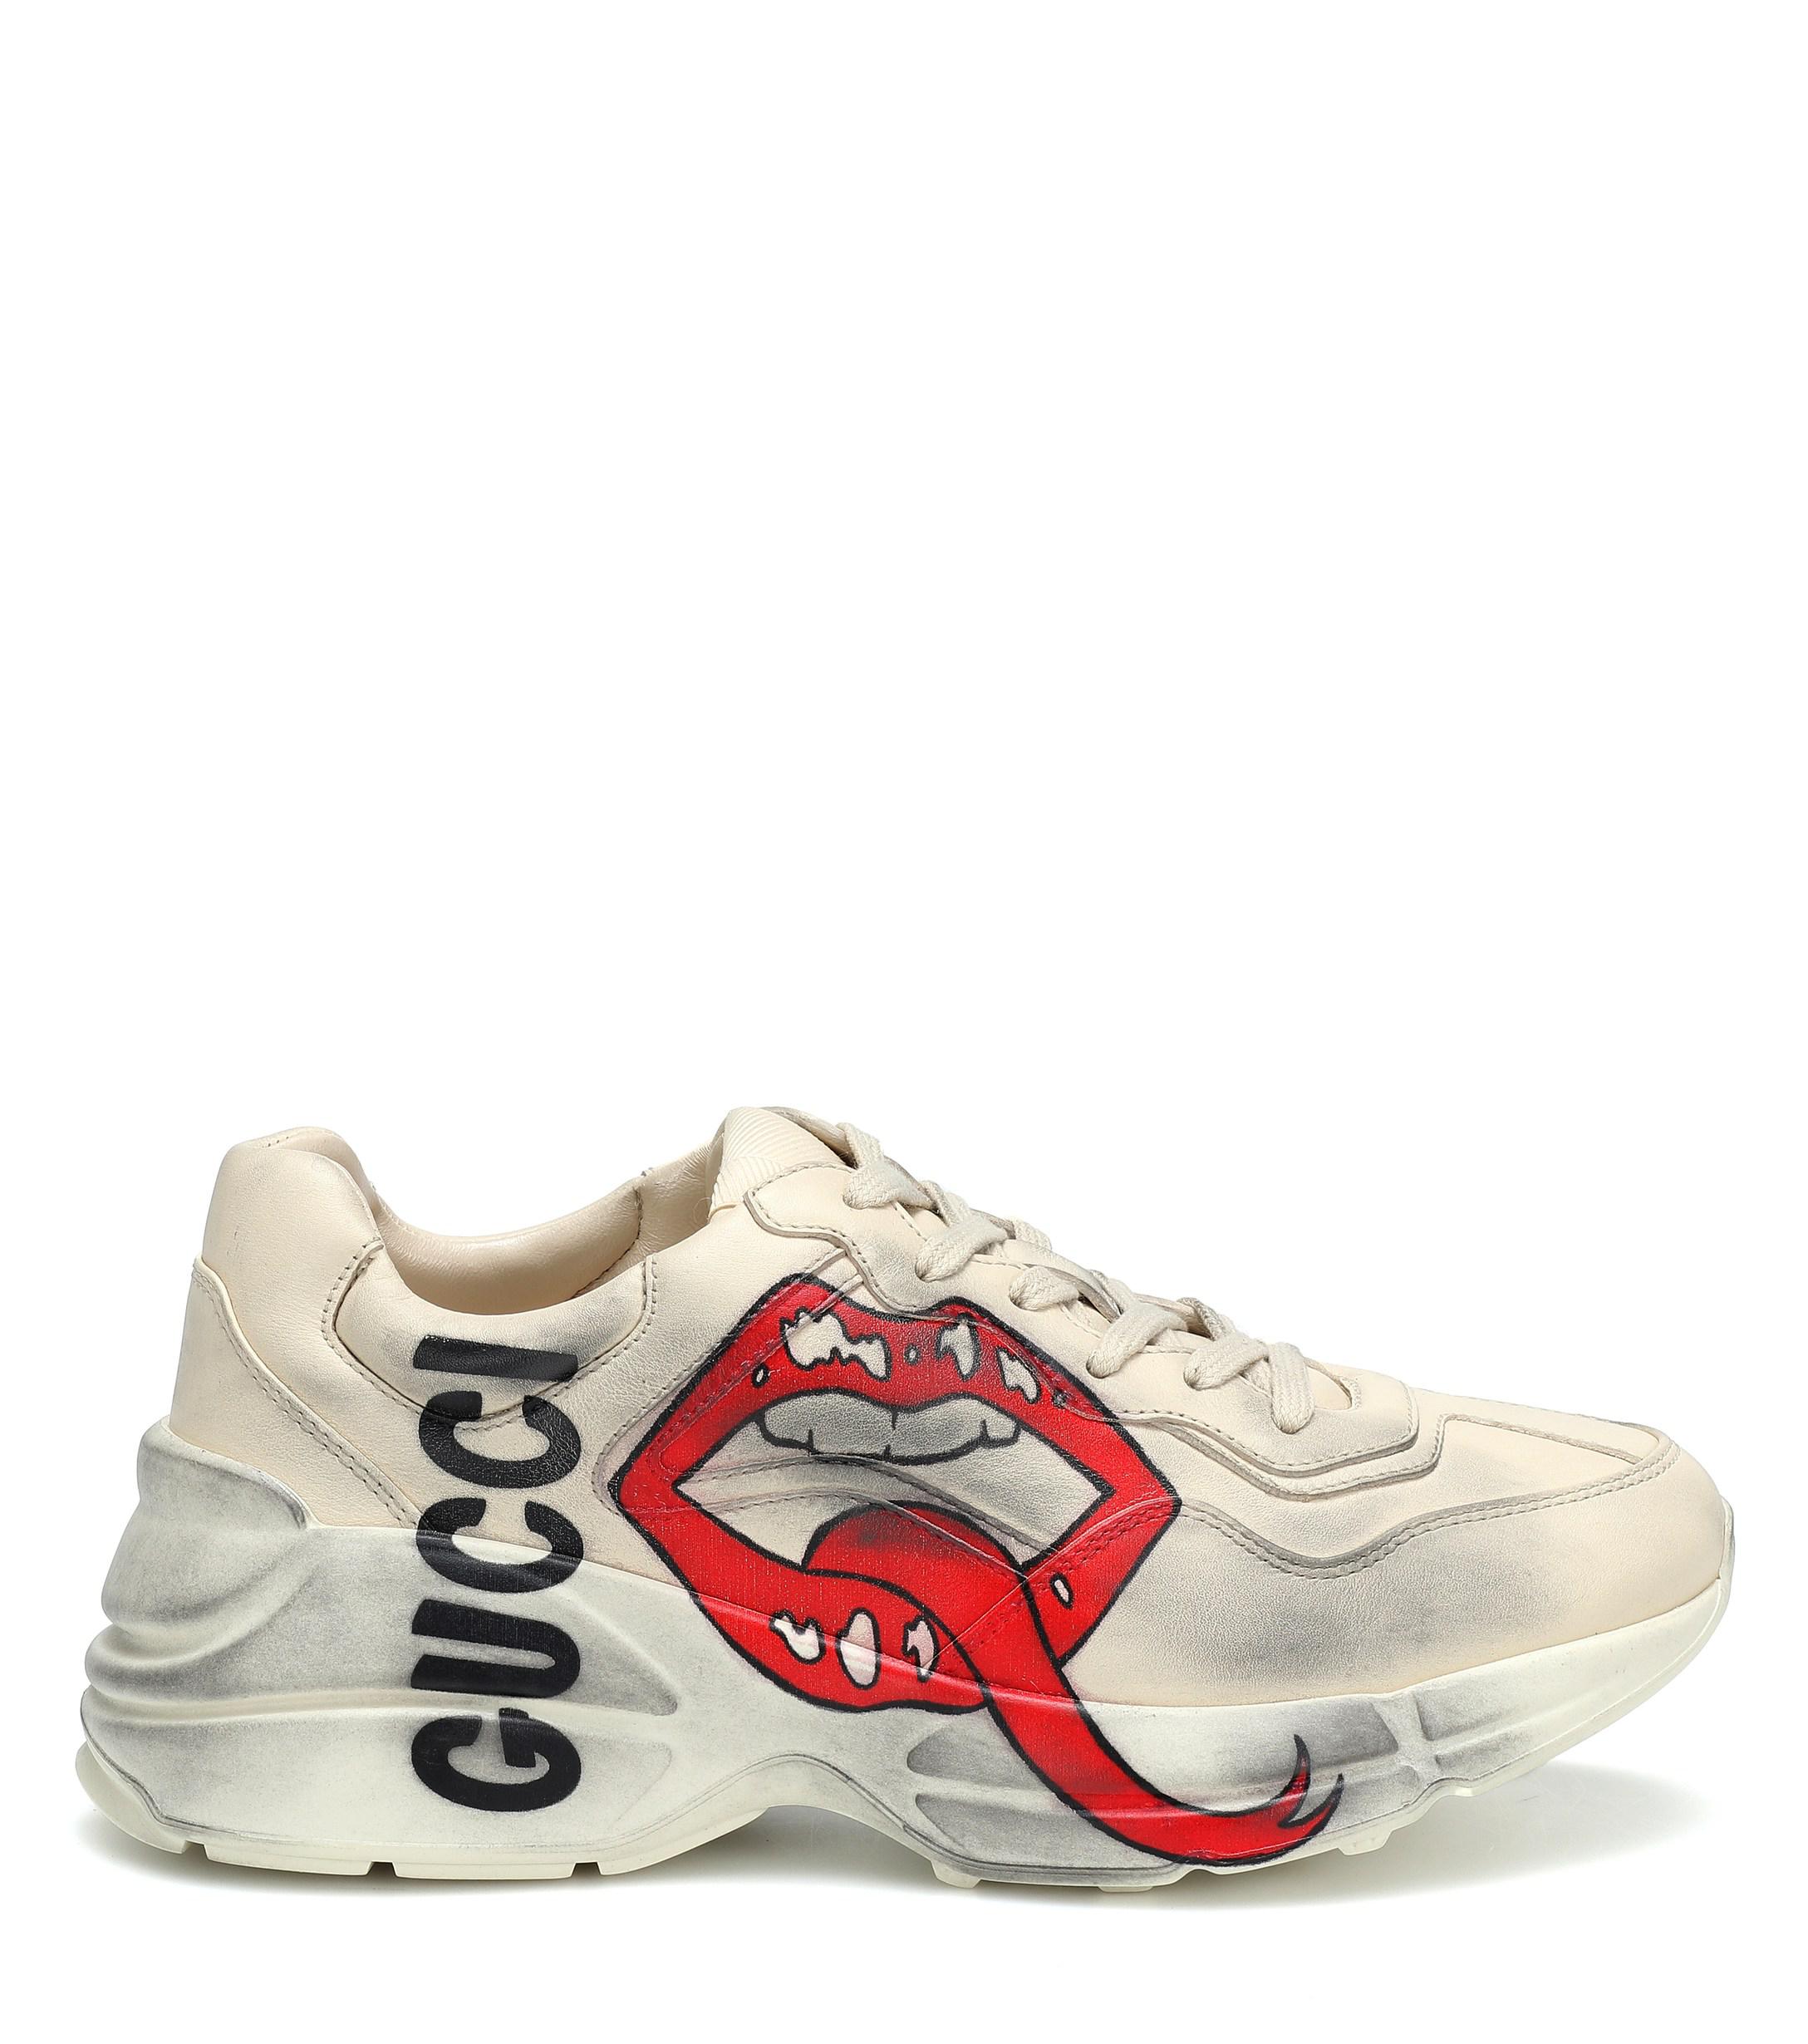 Gucci Rhyton Leather Sneakers - Lyst